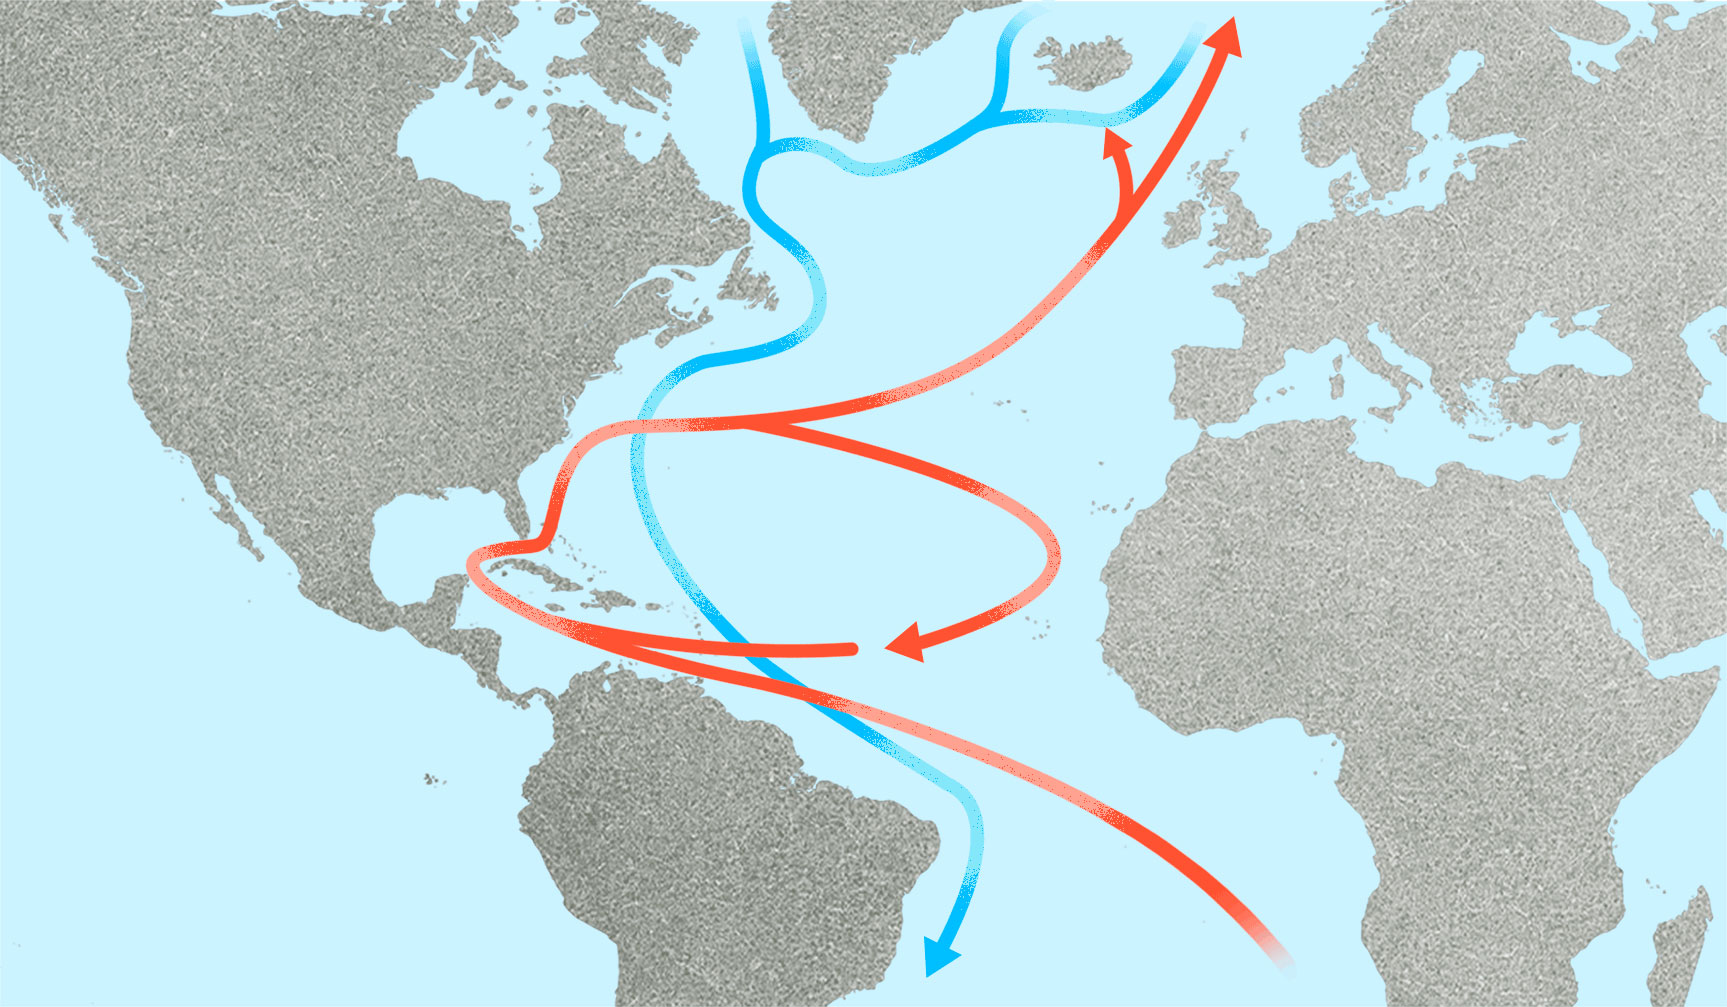 A map of the Atlantic ocean with blue and red arrows in the oceans signifying the flow of warmer and cold currents throughout the ocean.